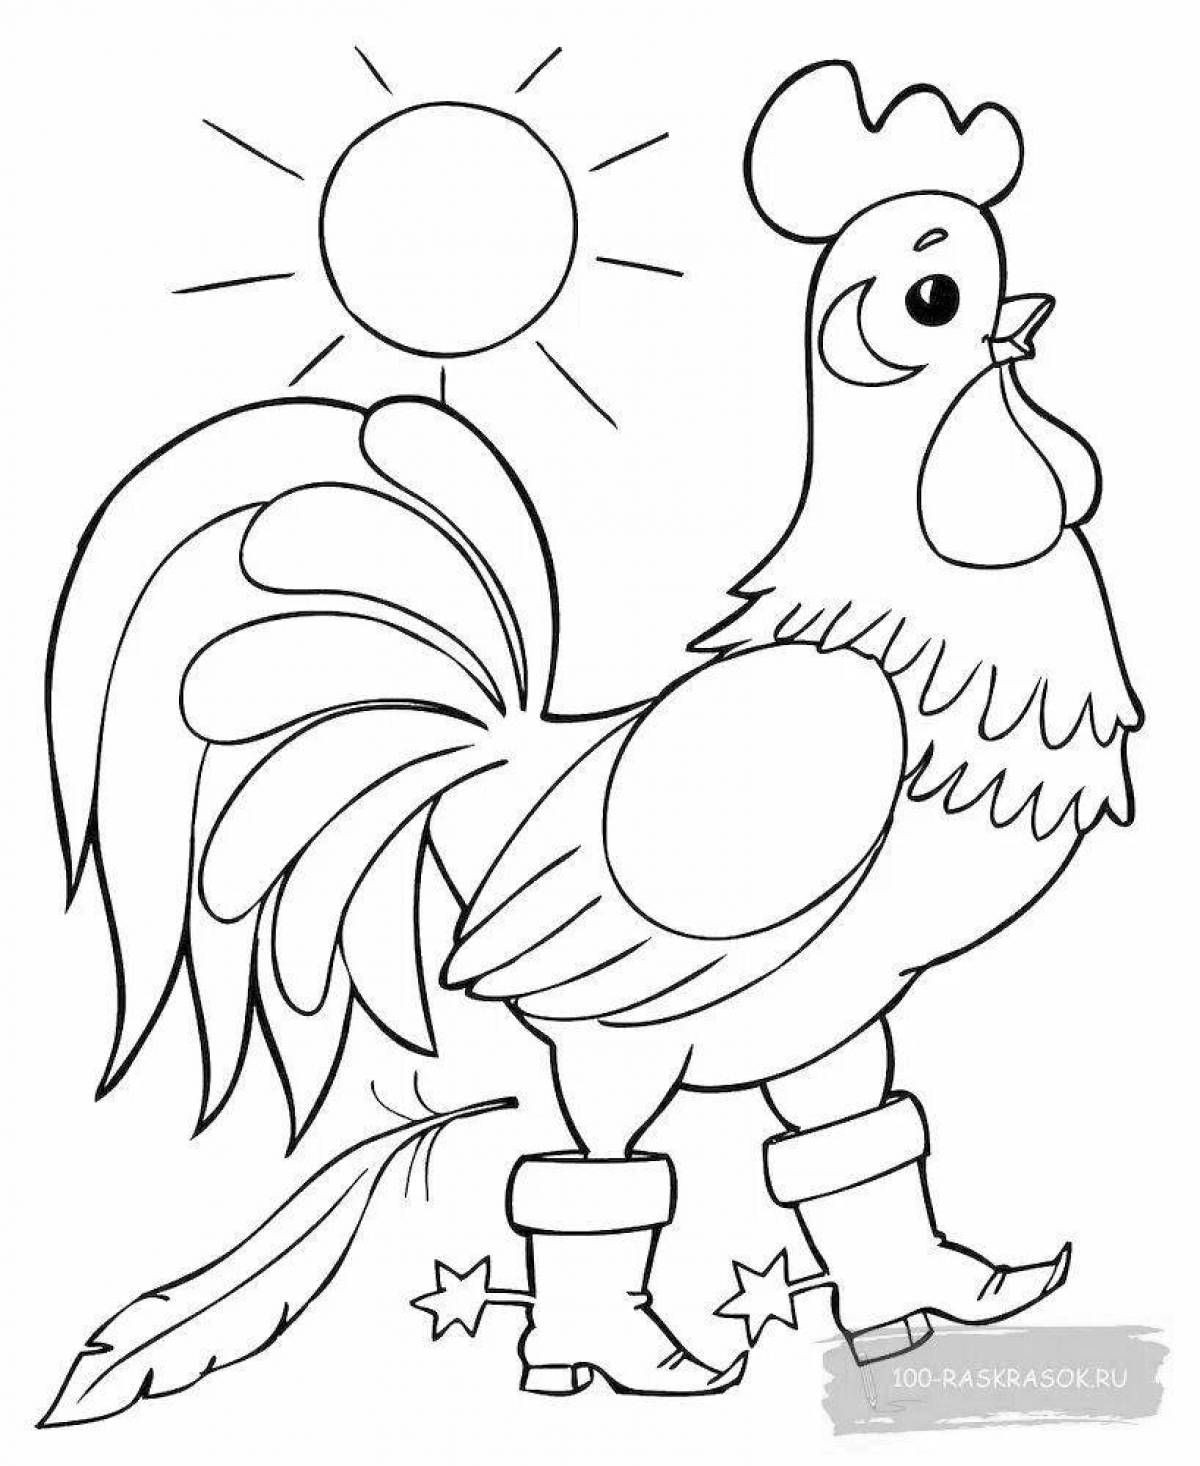 Cute rooster coloring for kids